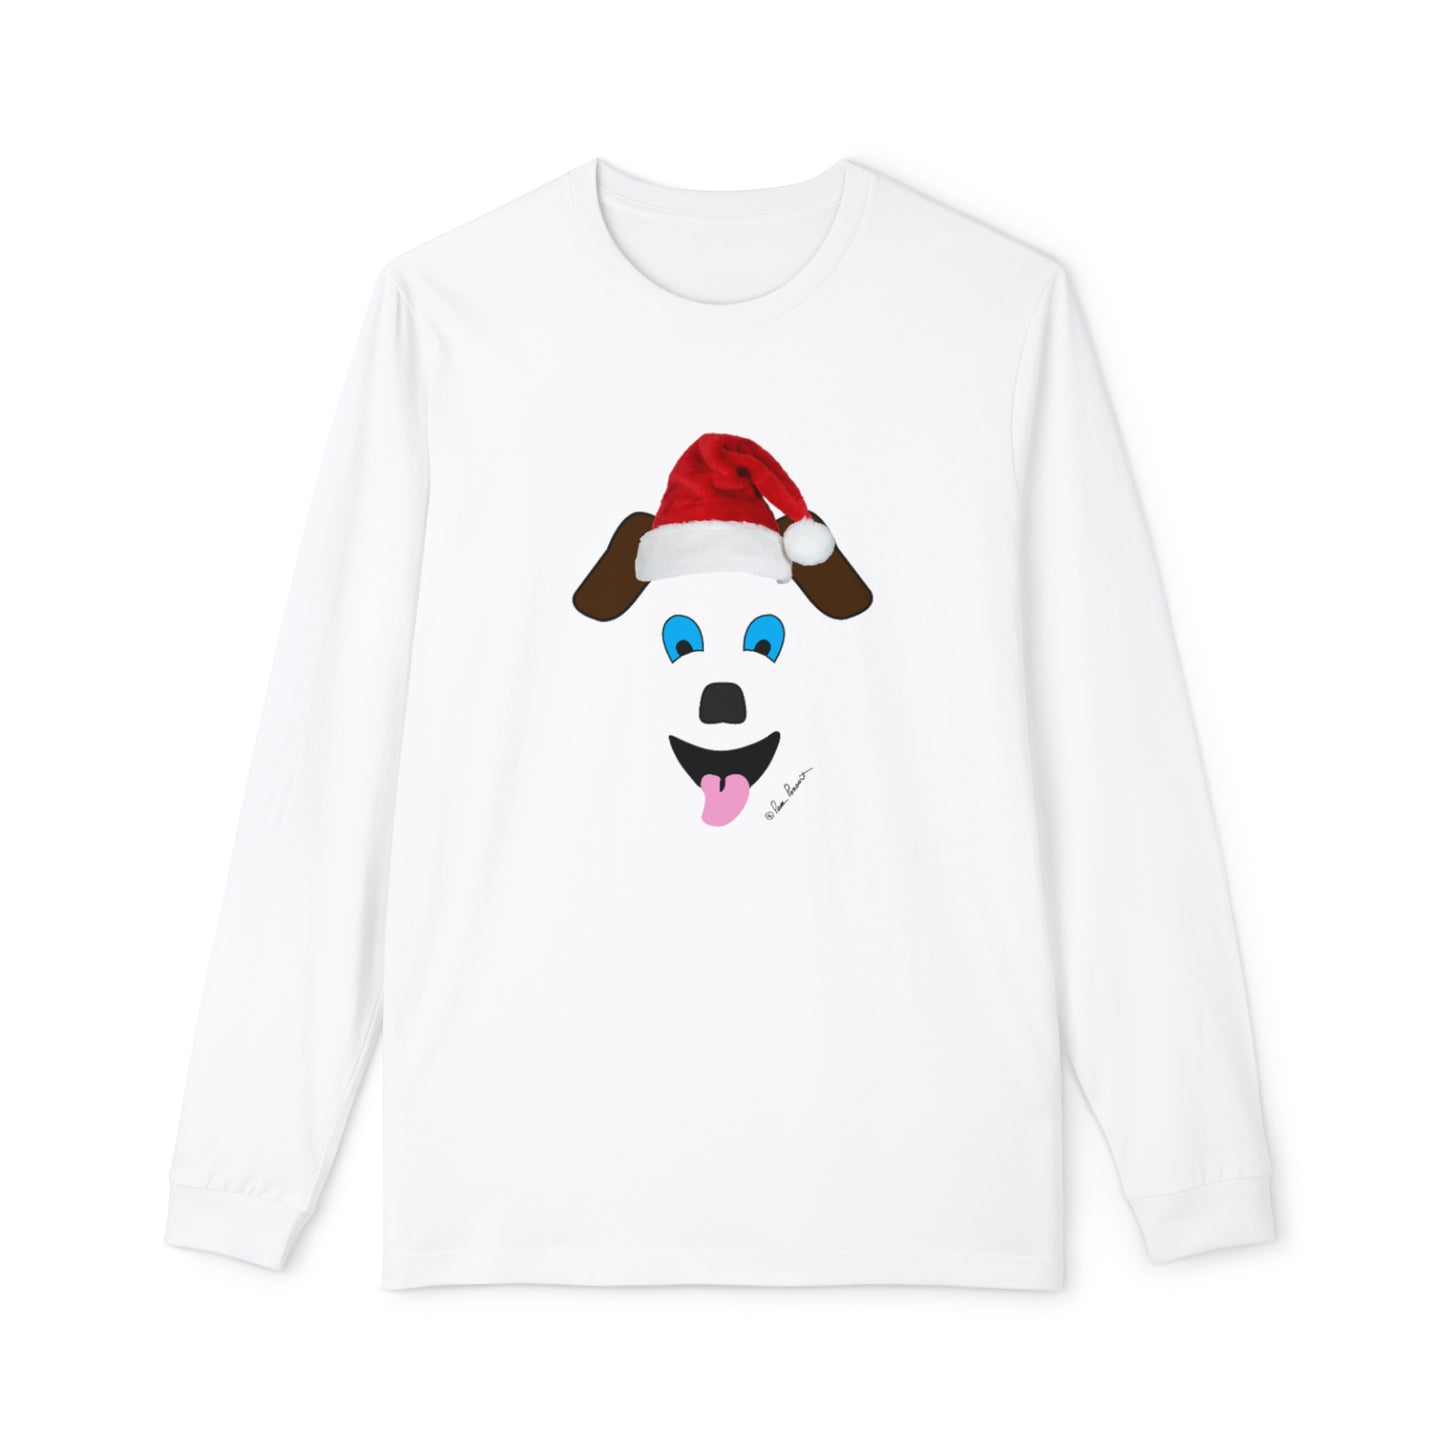 An American made Printify Men's Long-Sleeve Pajama-Set featuring a dog in a Santa hat. Made of 100% cotton.